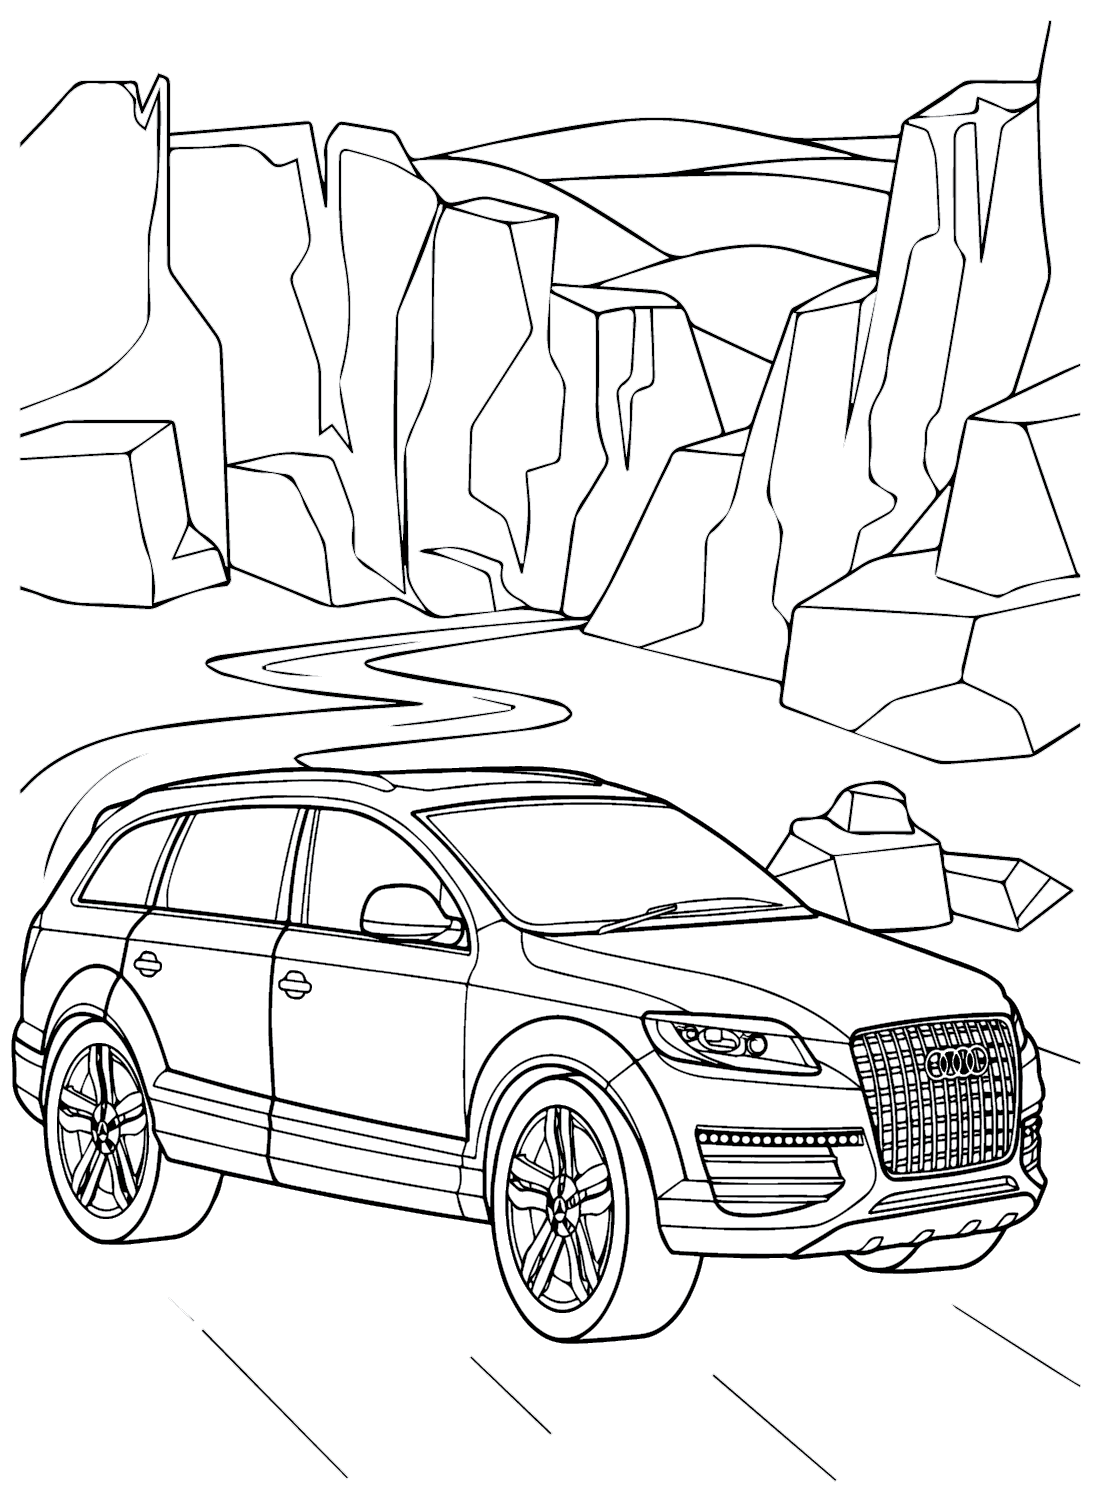 Audi Q7 Pictures to Color from Audi